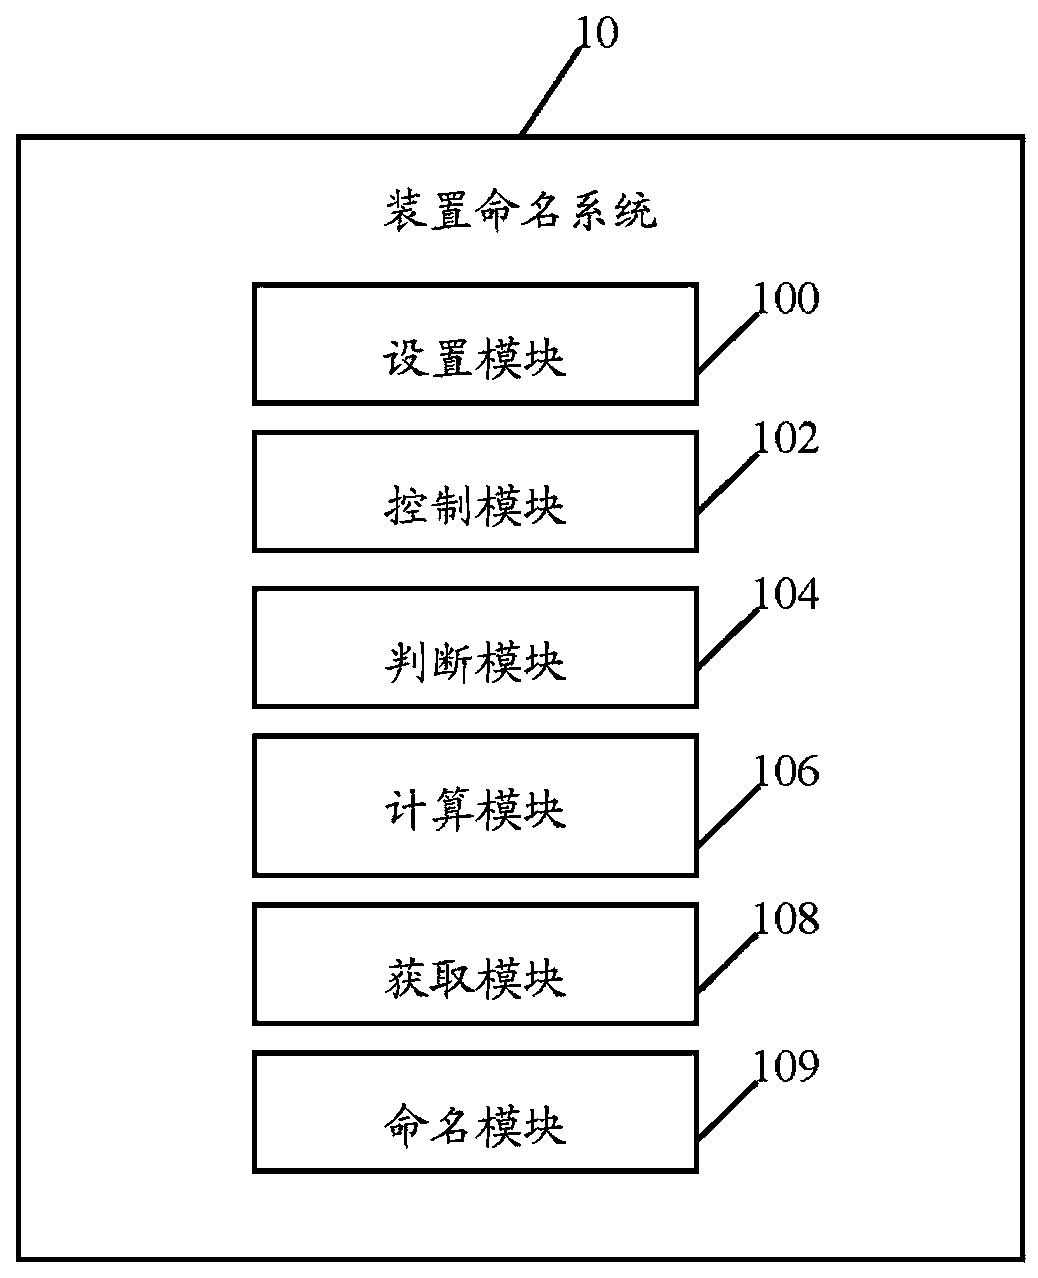 Device naming system and method